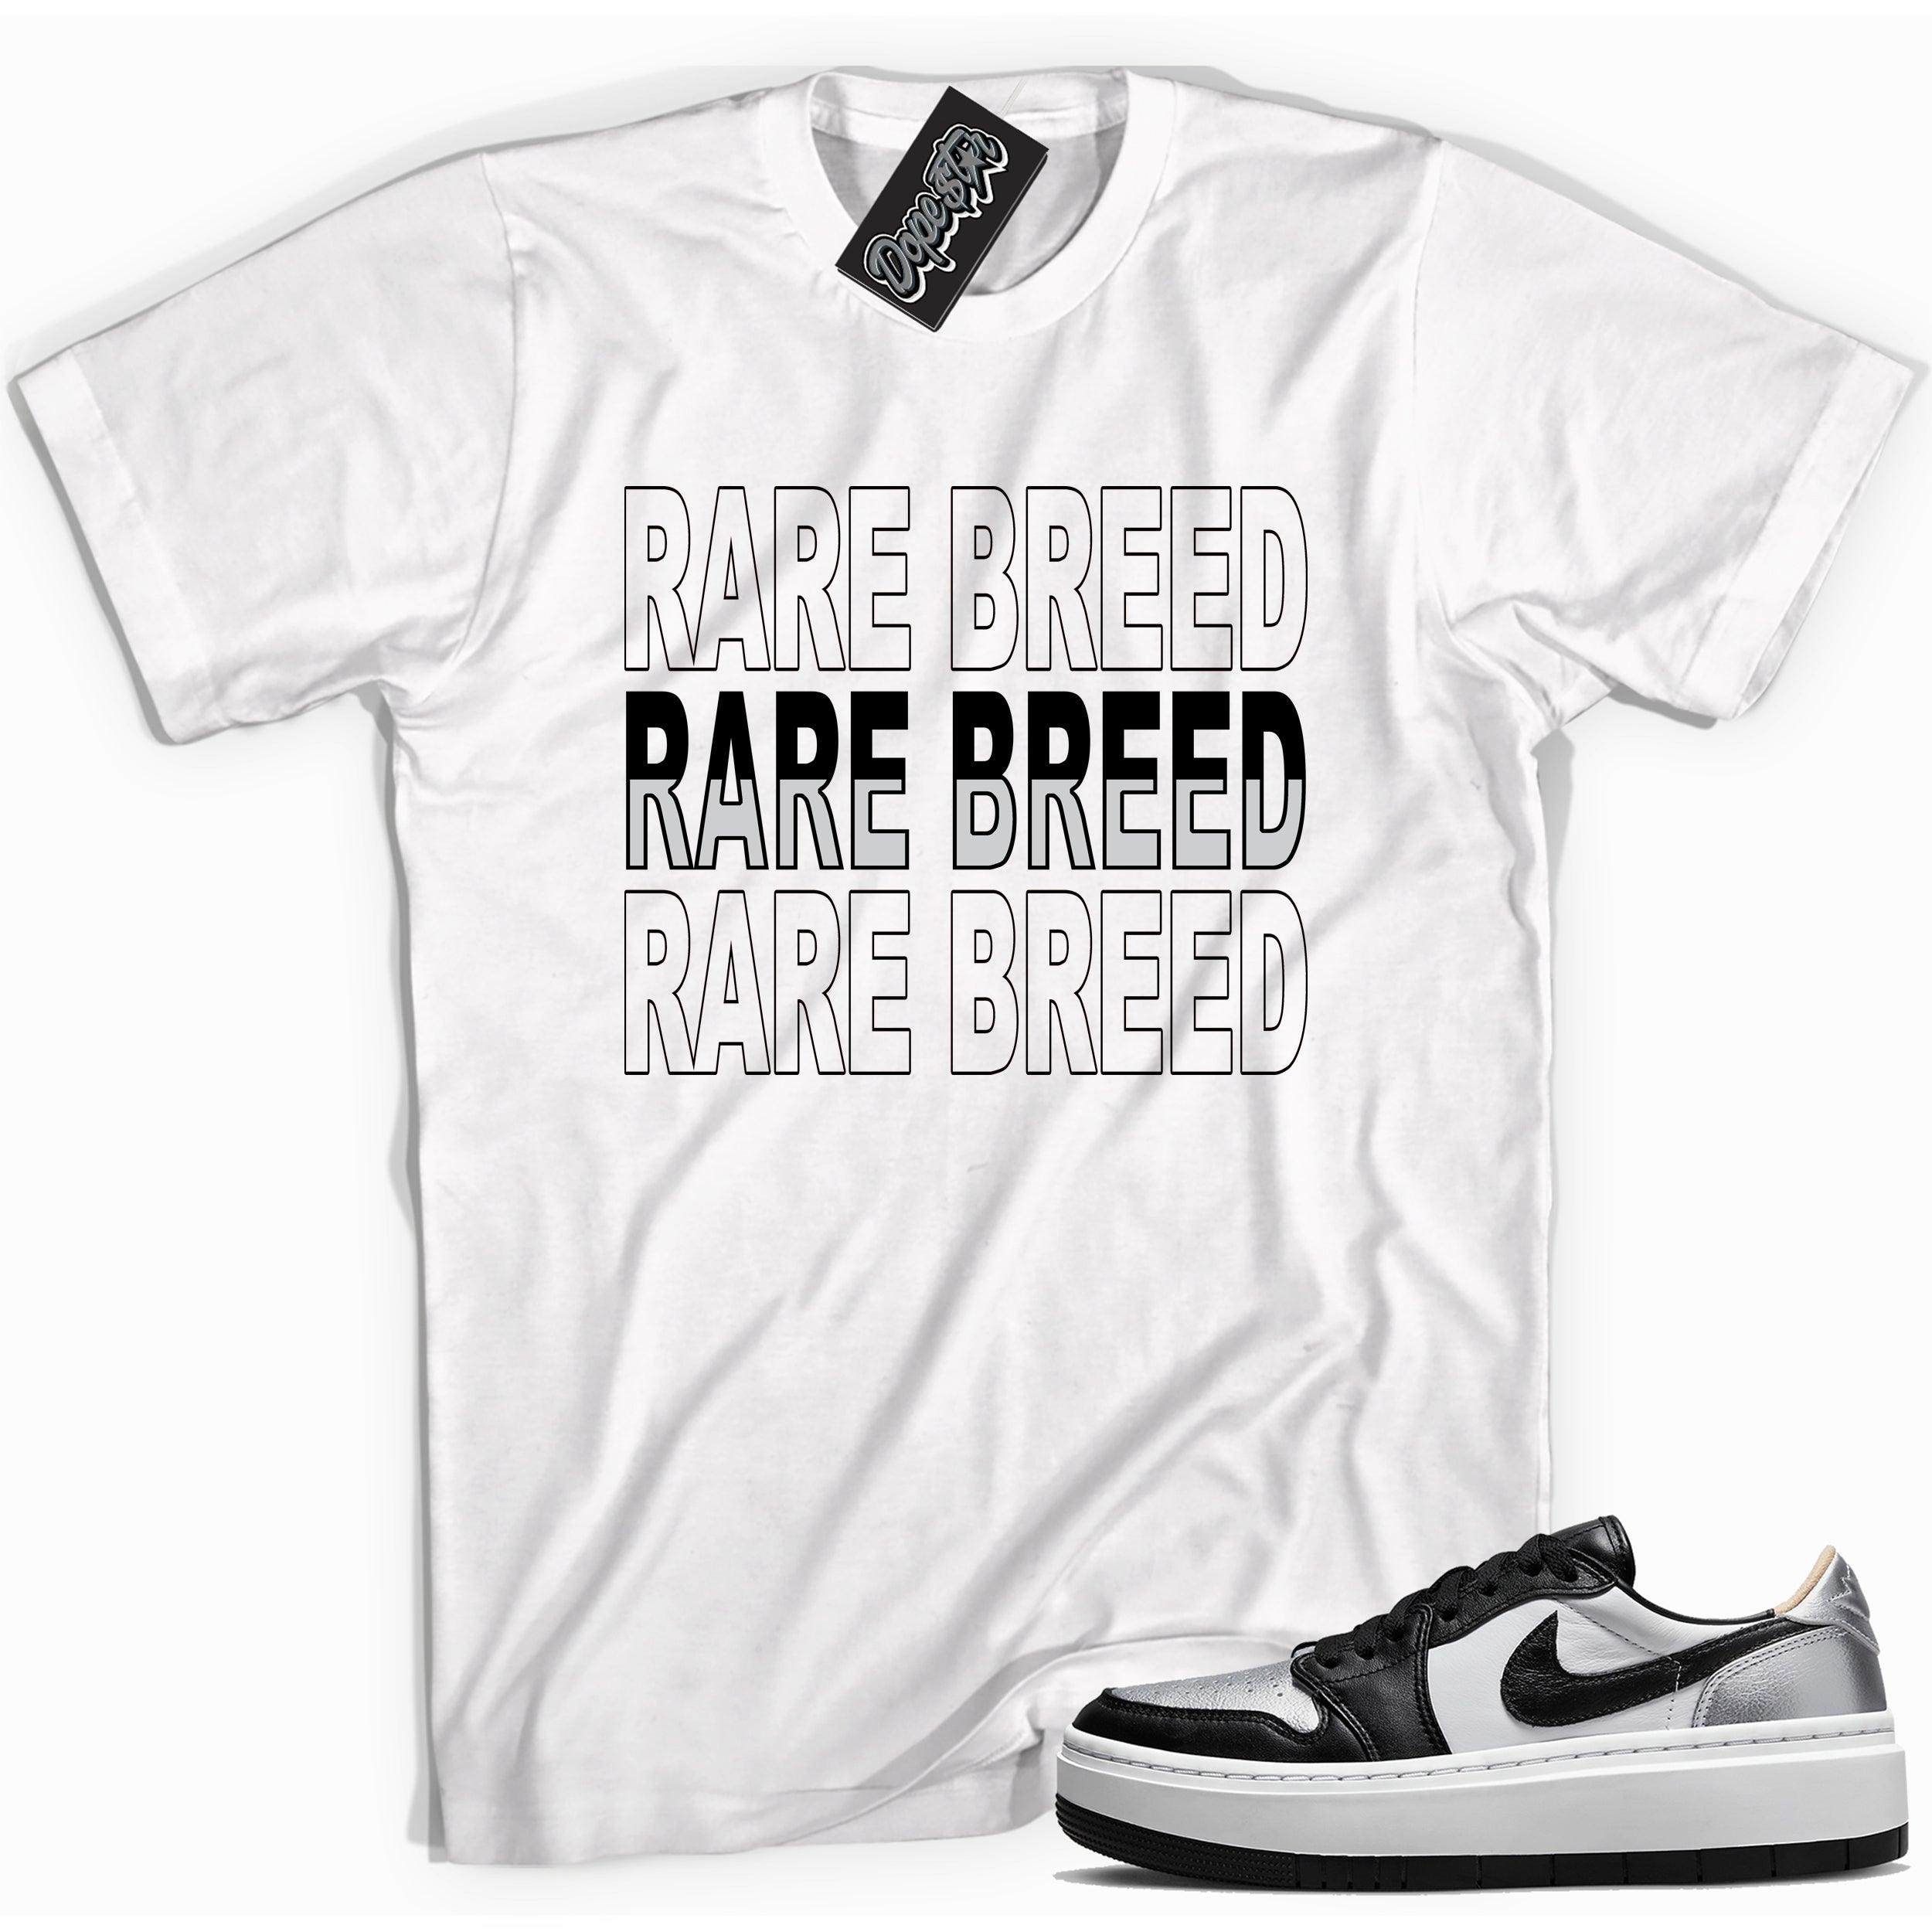 Cool white graphic tee with 'rare breed' print, that perfectly matches Air Jordan 1 Elevate Low SE Silver Toe sneakers.